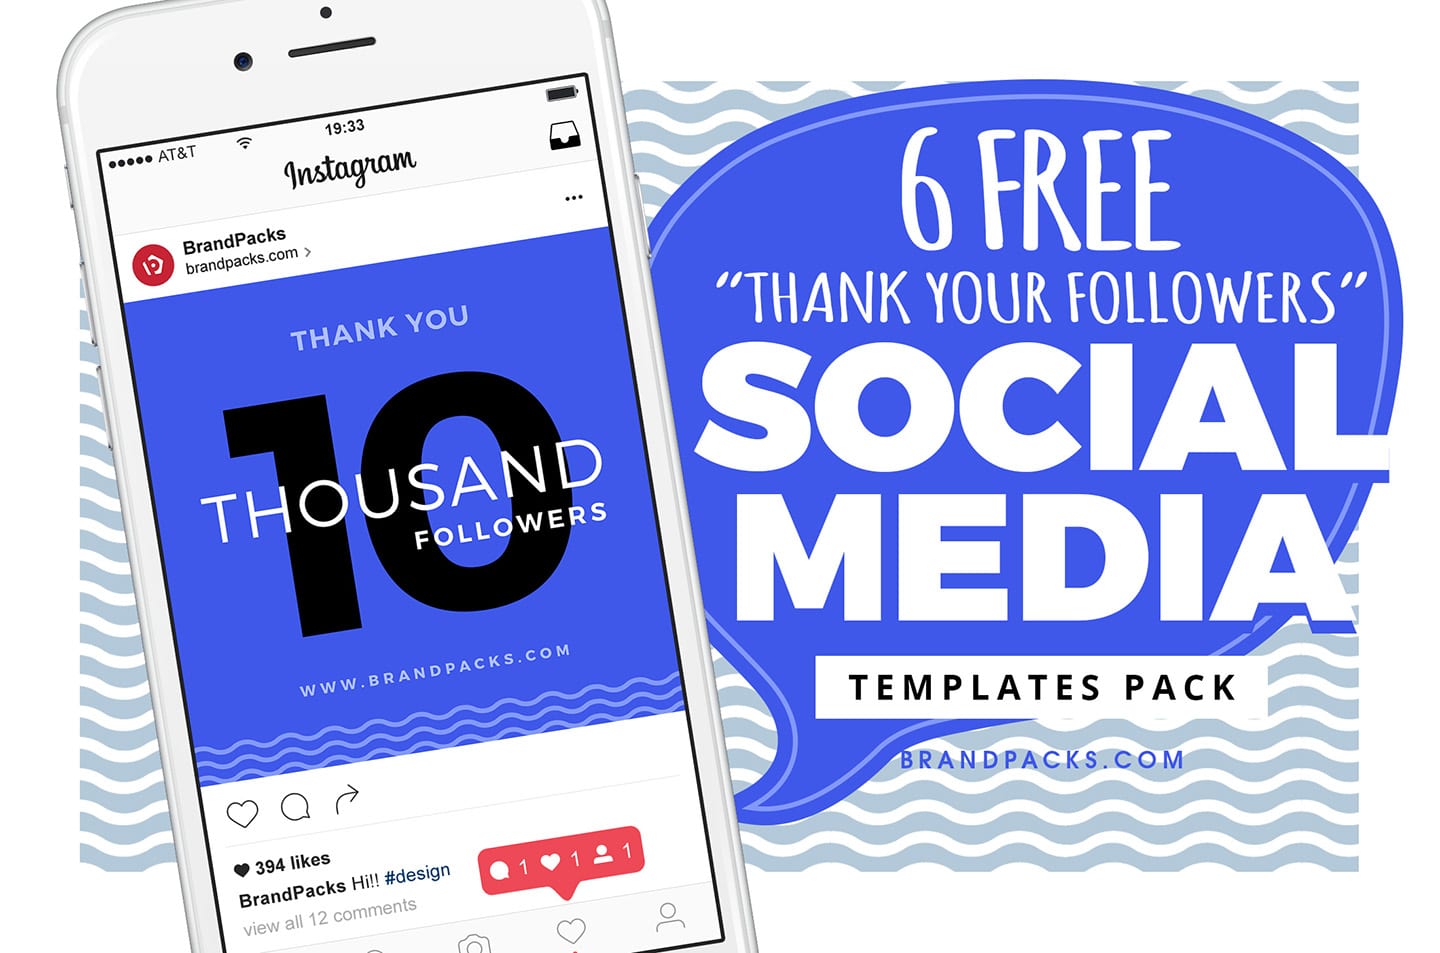 Free “Thank You” Templates for Social Media